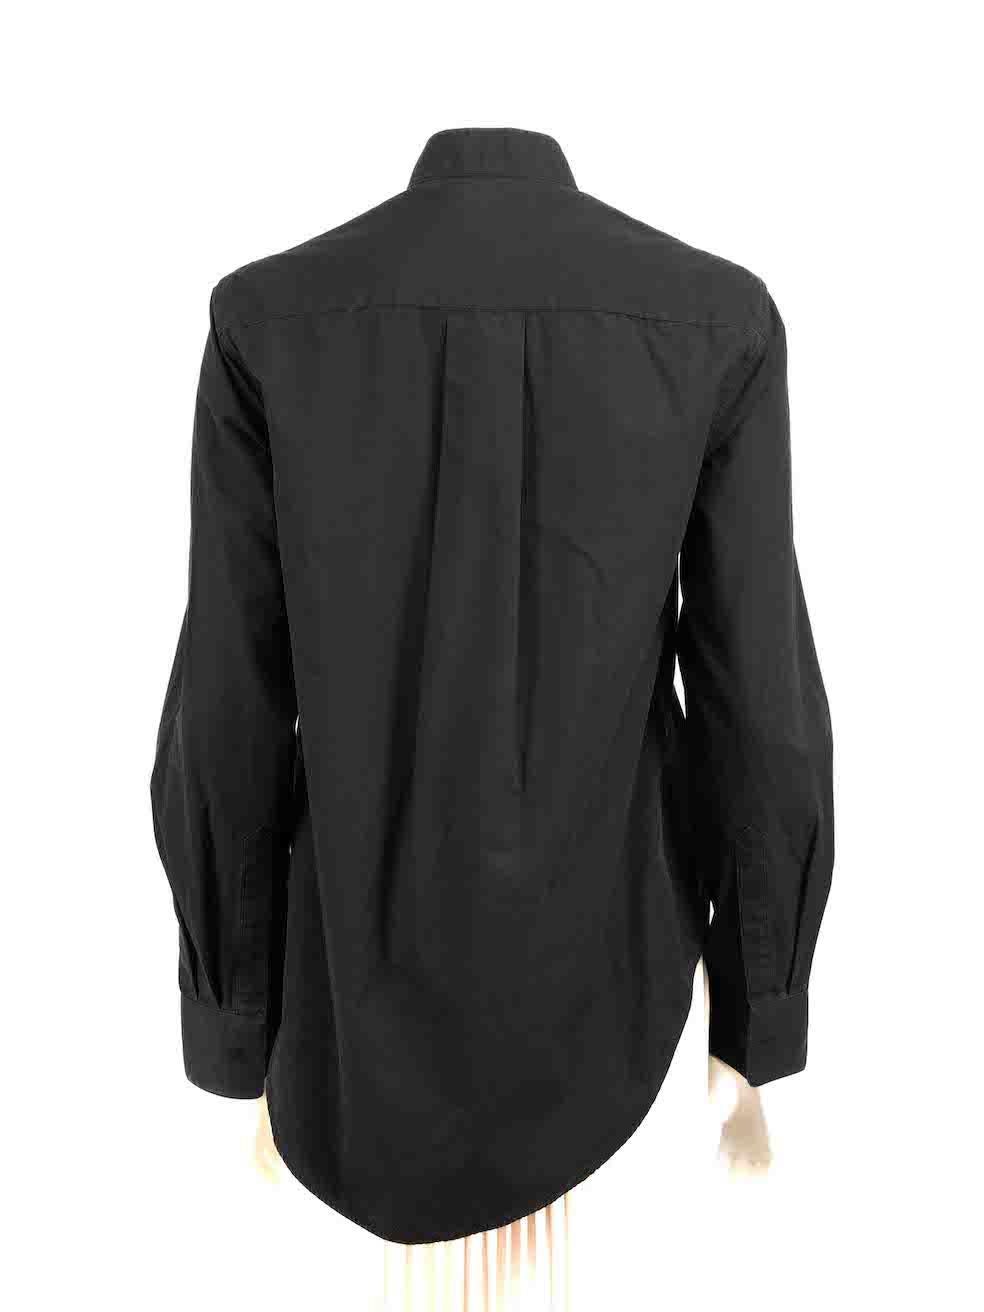 Wardrobe.NYC Black Cotton Long Sleeve Shirt Size M In Good Condition For Sale In London, GB